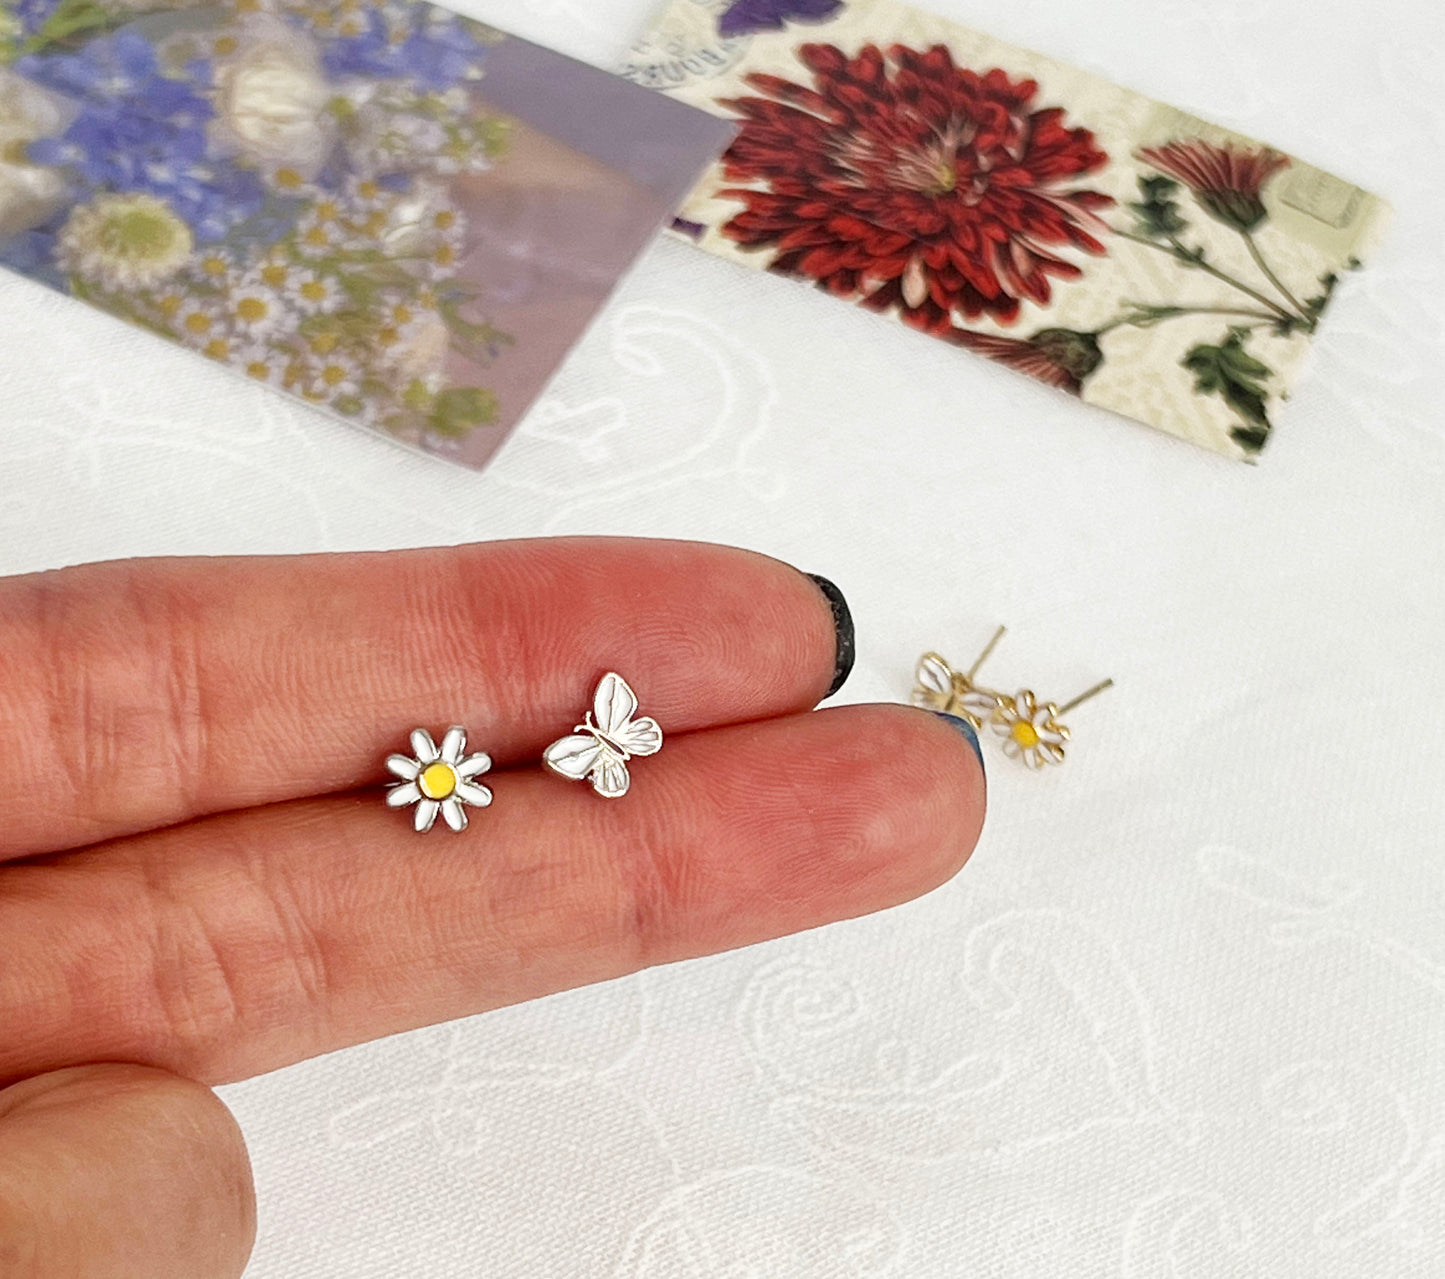 Tiny and Cute butterfly and daisy flower earrings